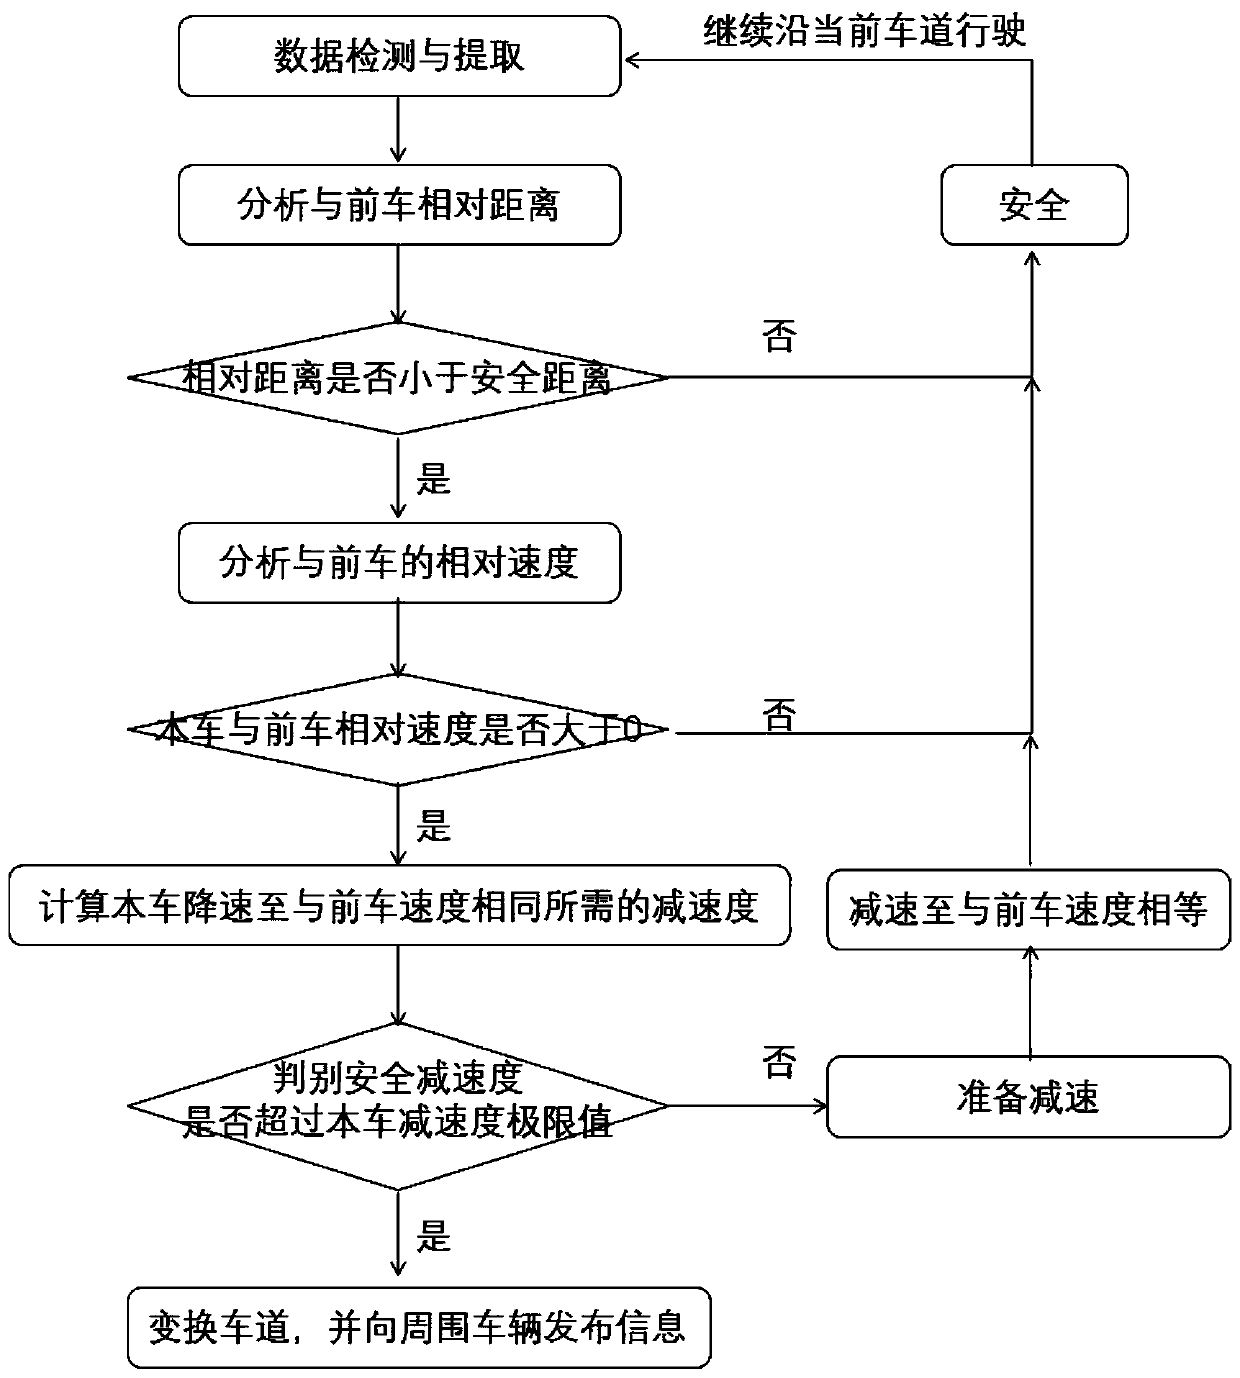 A safety judgment and processing method in the driving process of an intelligent network-connected automatic driving automobile